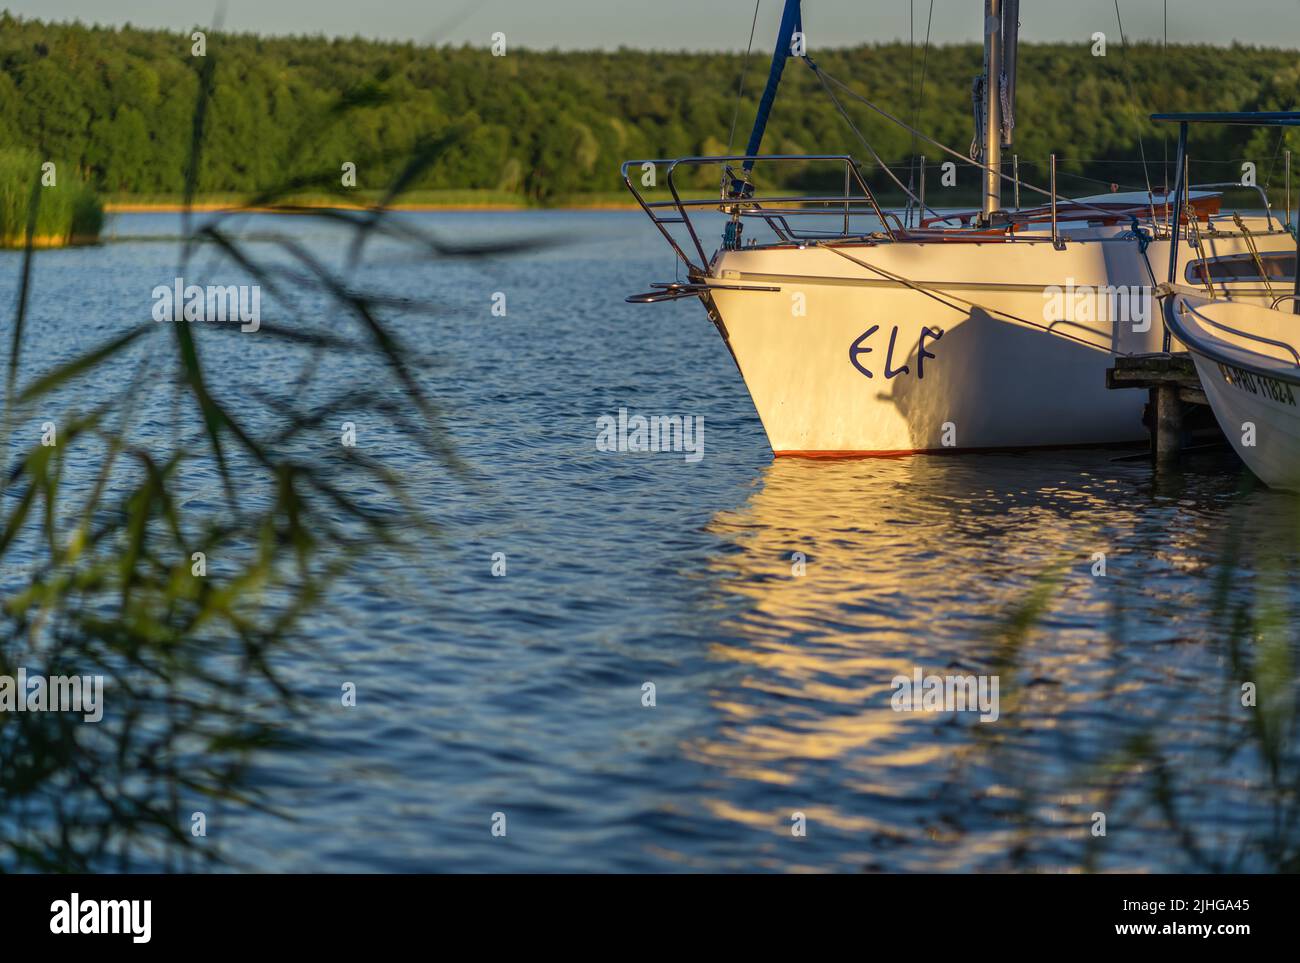 Jezioro Ostrowieckie, Poland - July 2020 : A small private boats on the shore of a lake surrounded by reed and trees under the blue sky Stock Photo